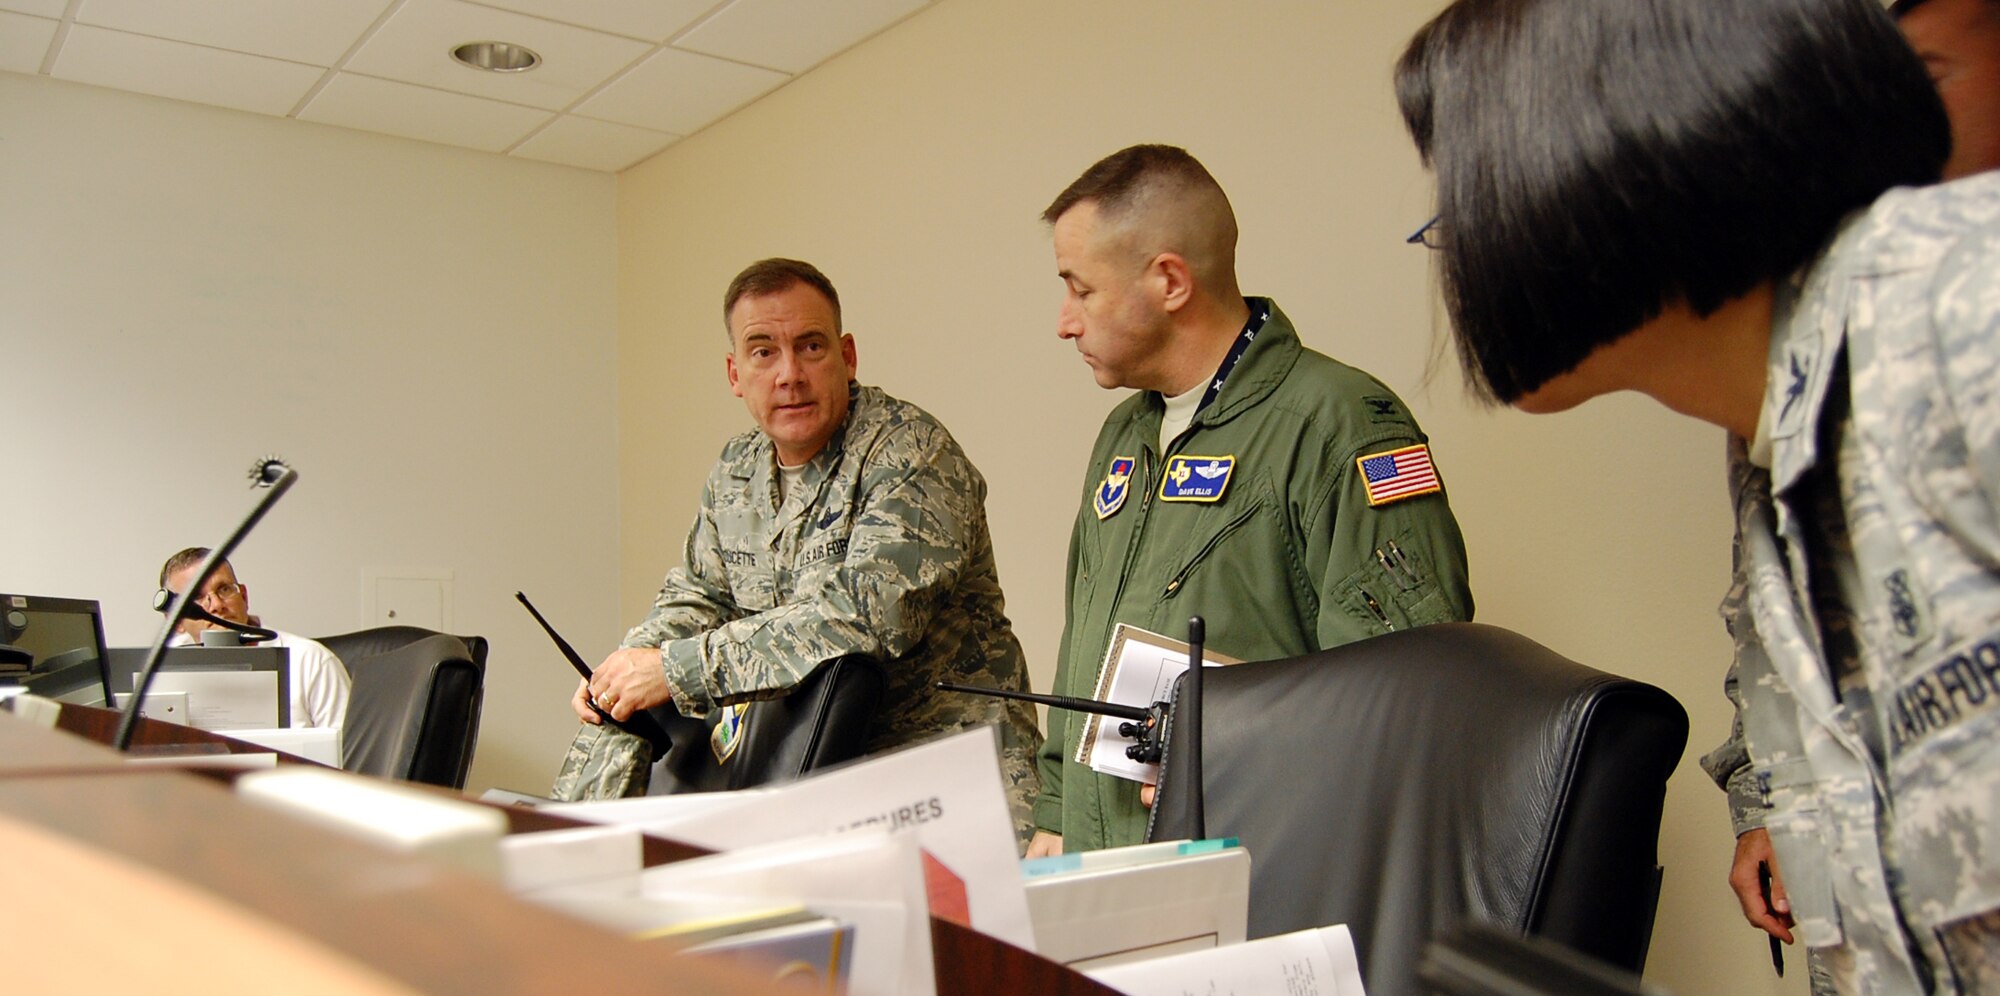 LAUGHLIN AIR FORCE BASE, Texas – Col. John Doucette, 47th Flying Training Wing commander, consults with other commanders from within the wing in the Emergency Operations Center here Sept. 24.  Laughlin’s state-of-the-art EOC acts as a central command location for any large-scale event taking place on base in which quick, clear communication among a variety of key agencies is essential.  (U.S. Air Force photo by Staff Sgt Austin M. May)